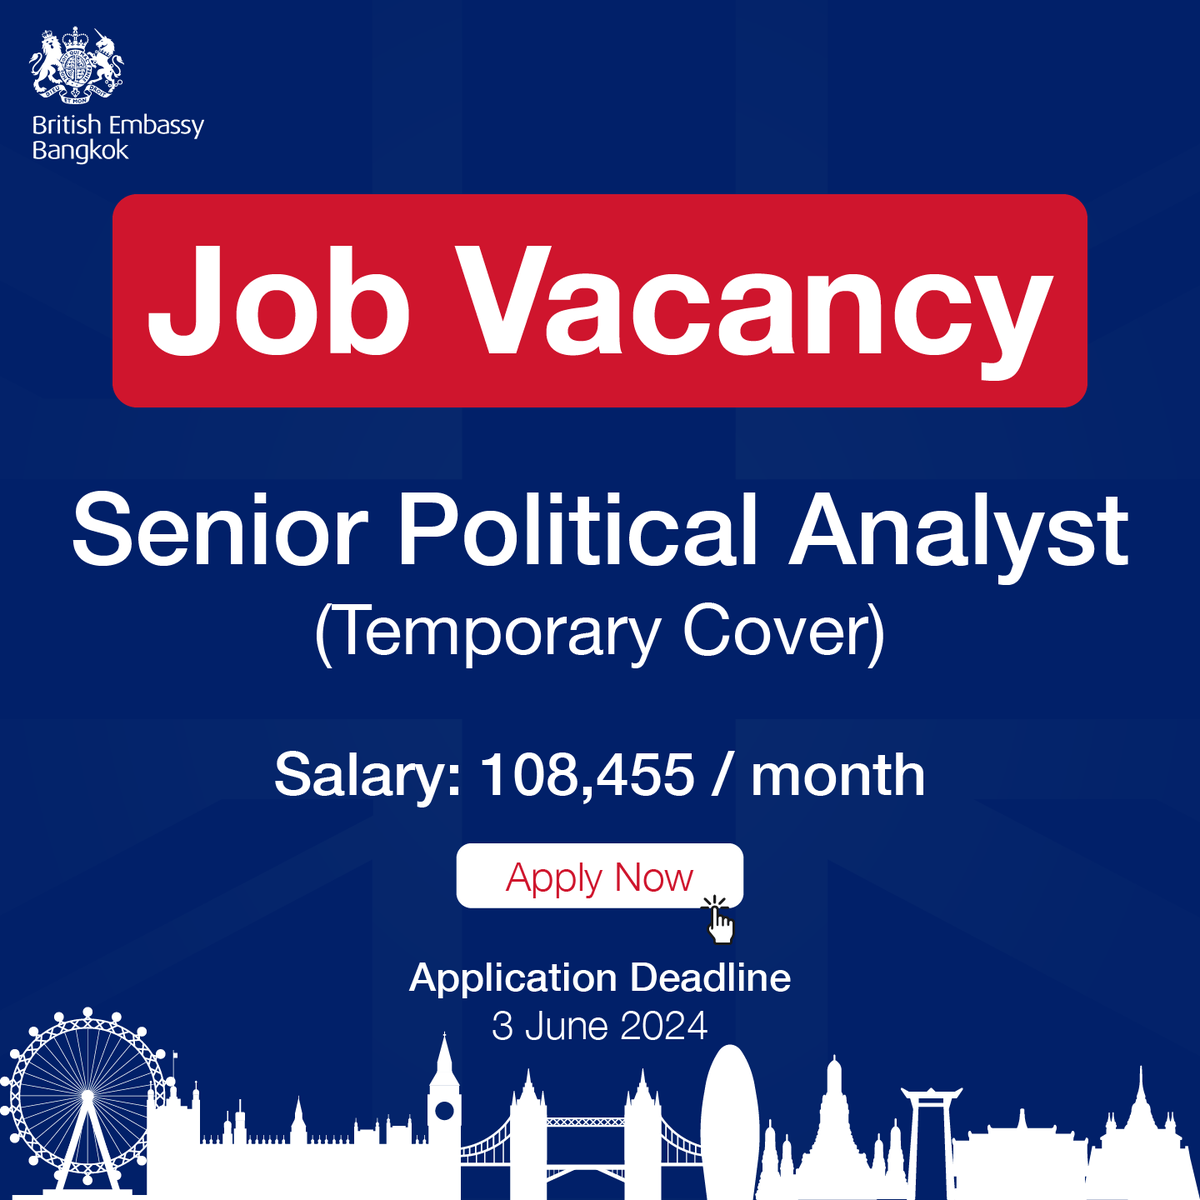 🇬🇧📢 The British Embassy Bangkok currently has a vacancy for “Senior Political Analyst (Temporary Cover).” Salary : 108,455 THB per month. All applications must be received before 11:55pm (Bangkok time) on 3 June 2024. . For more information, please visit bit.ly/SeniorPolitica…